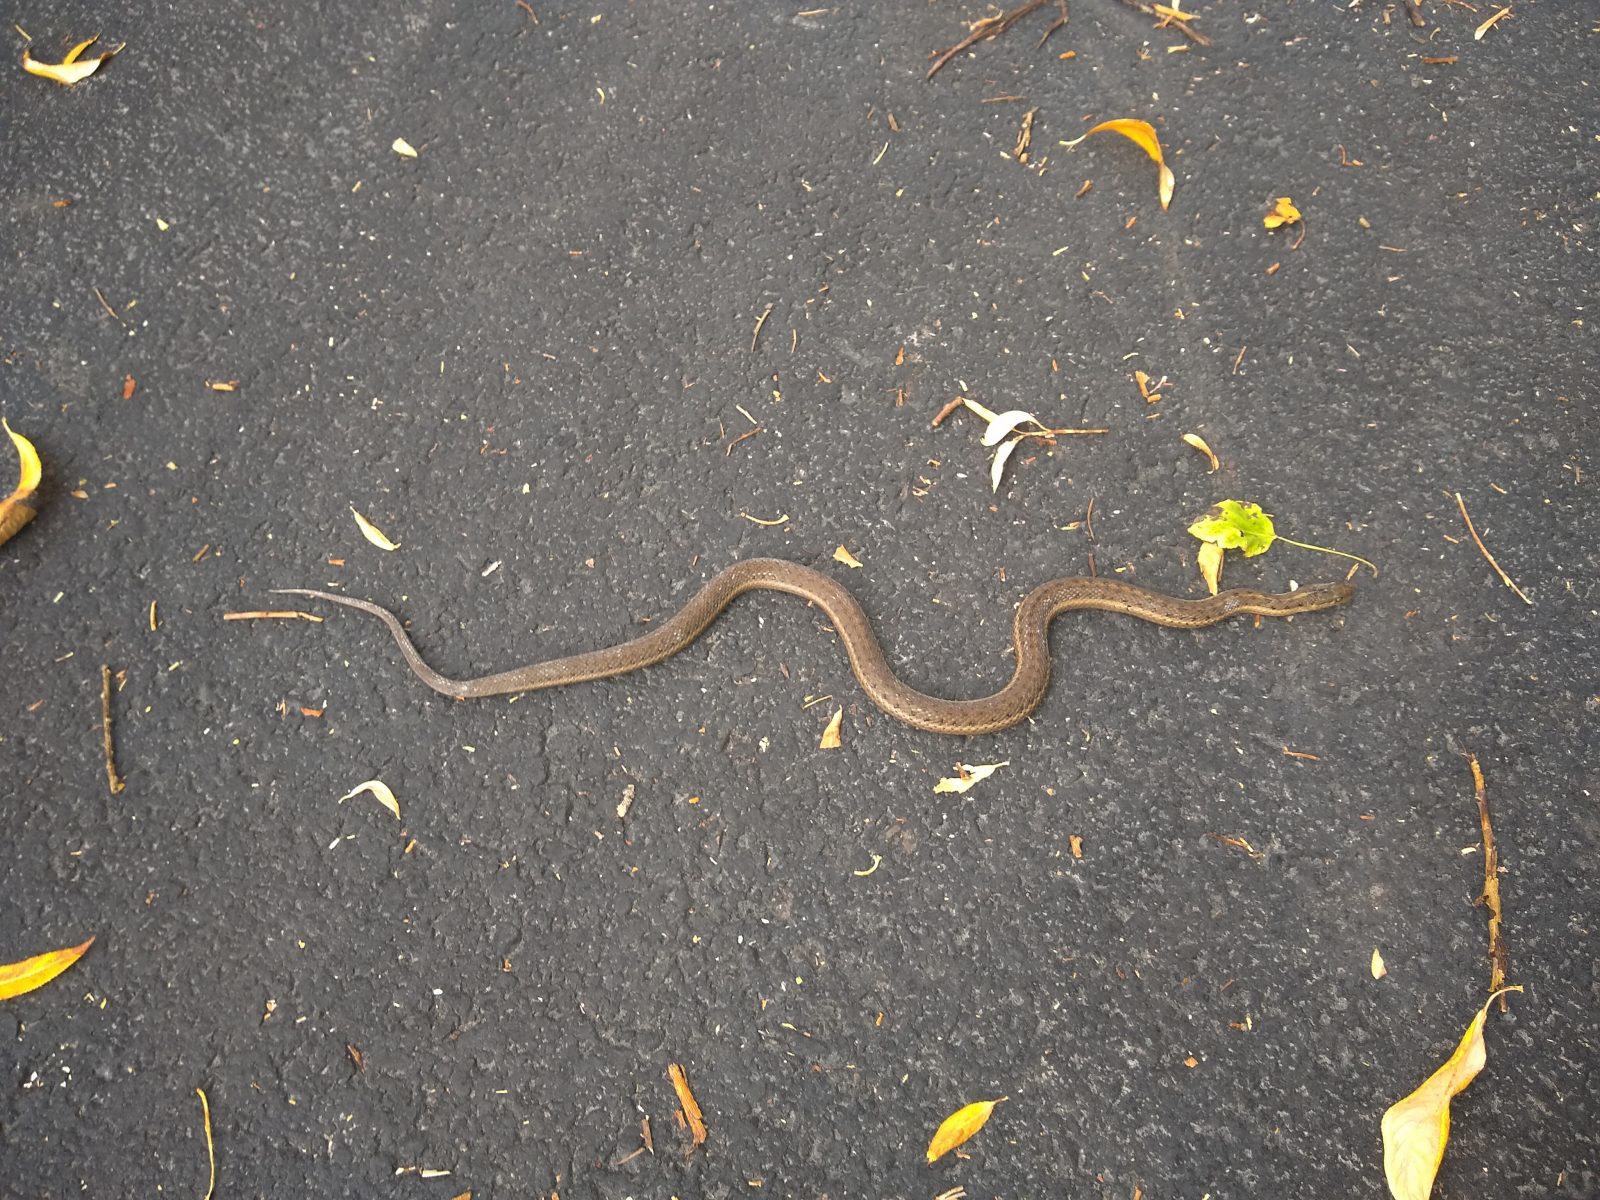 Snake on the path